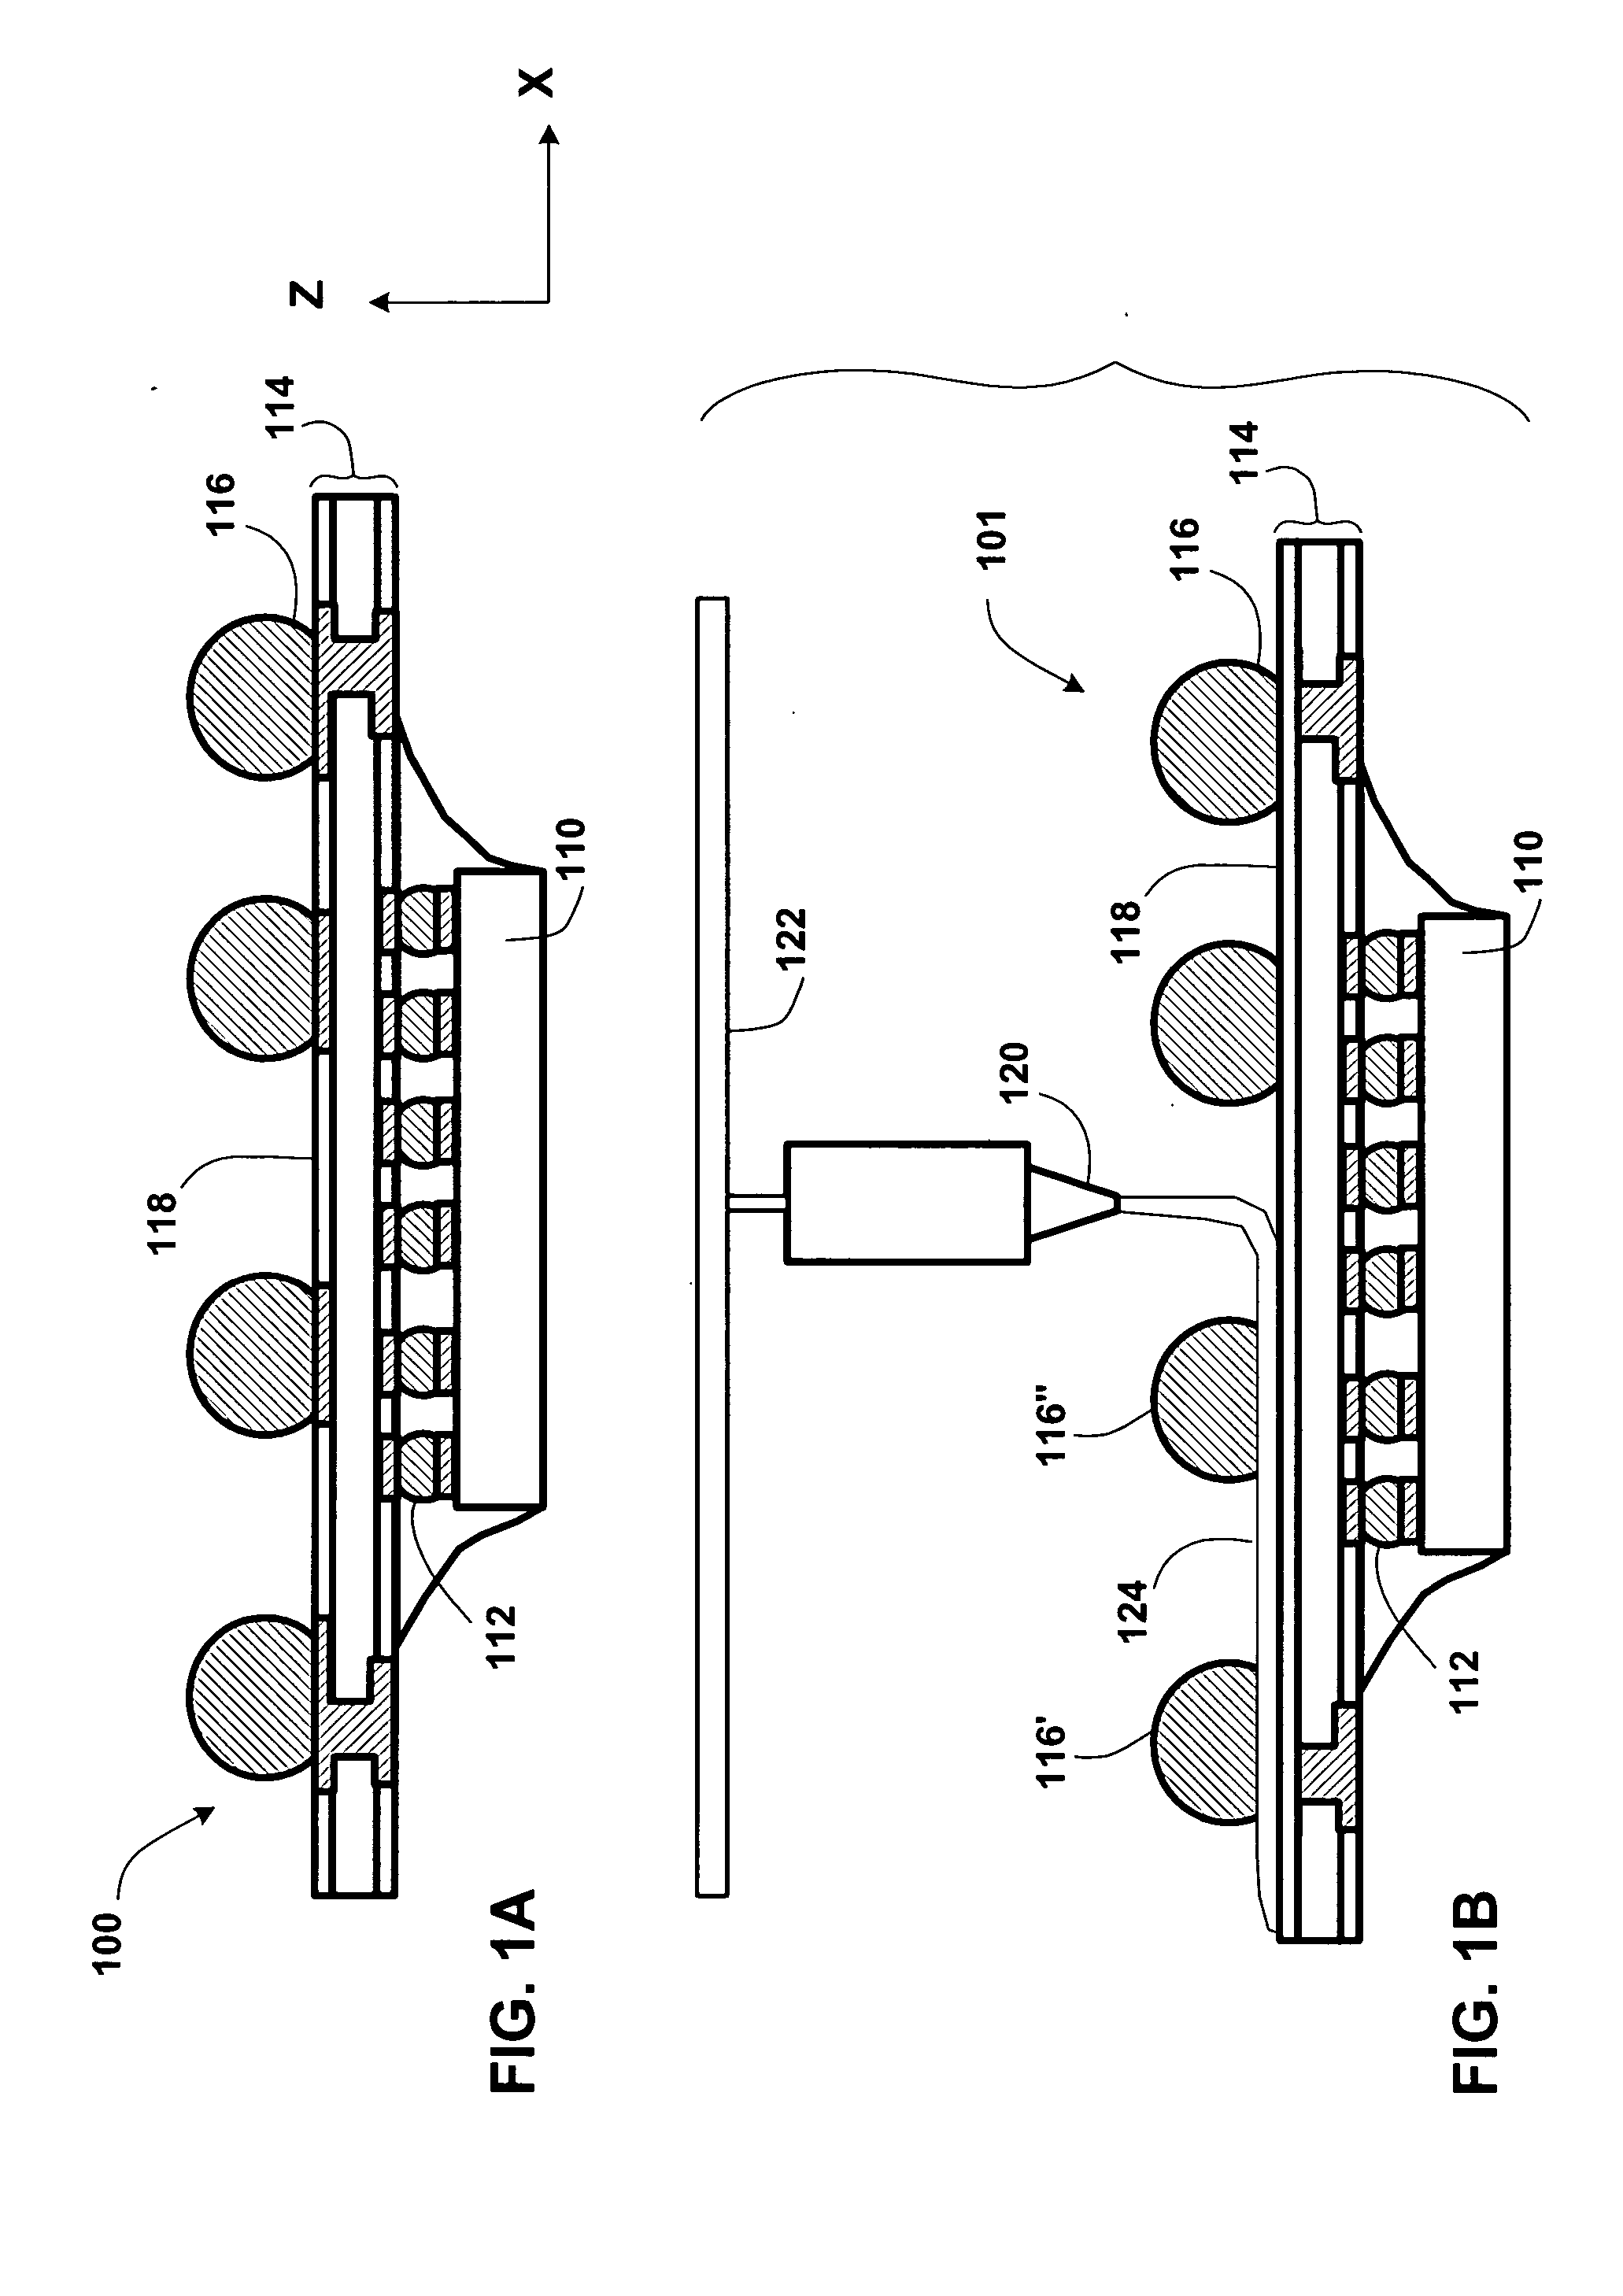 Stress-relief layer and stress-compensation collar in contact arrays, and processes of making same